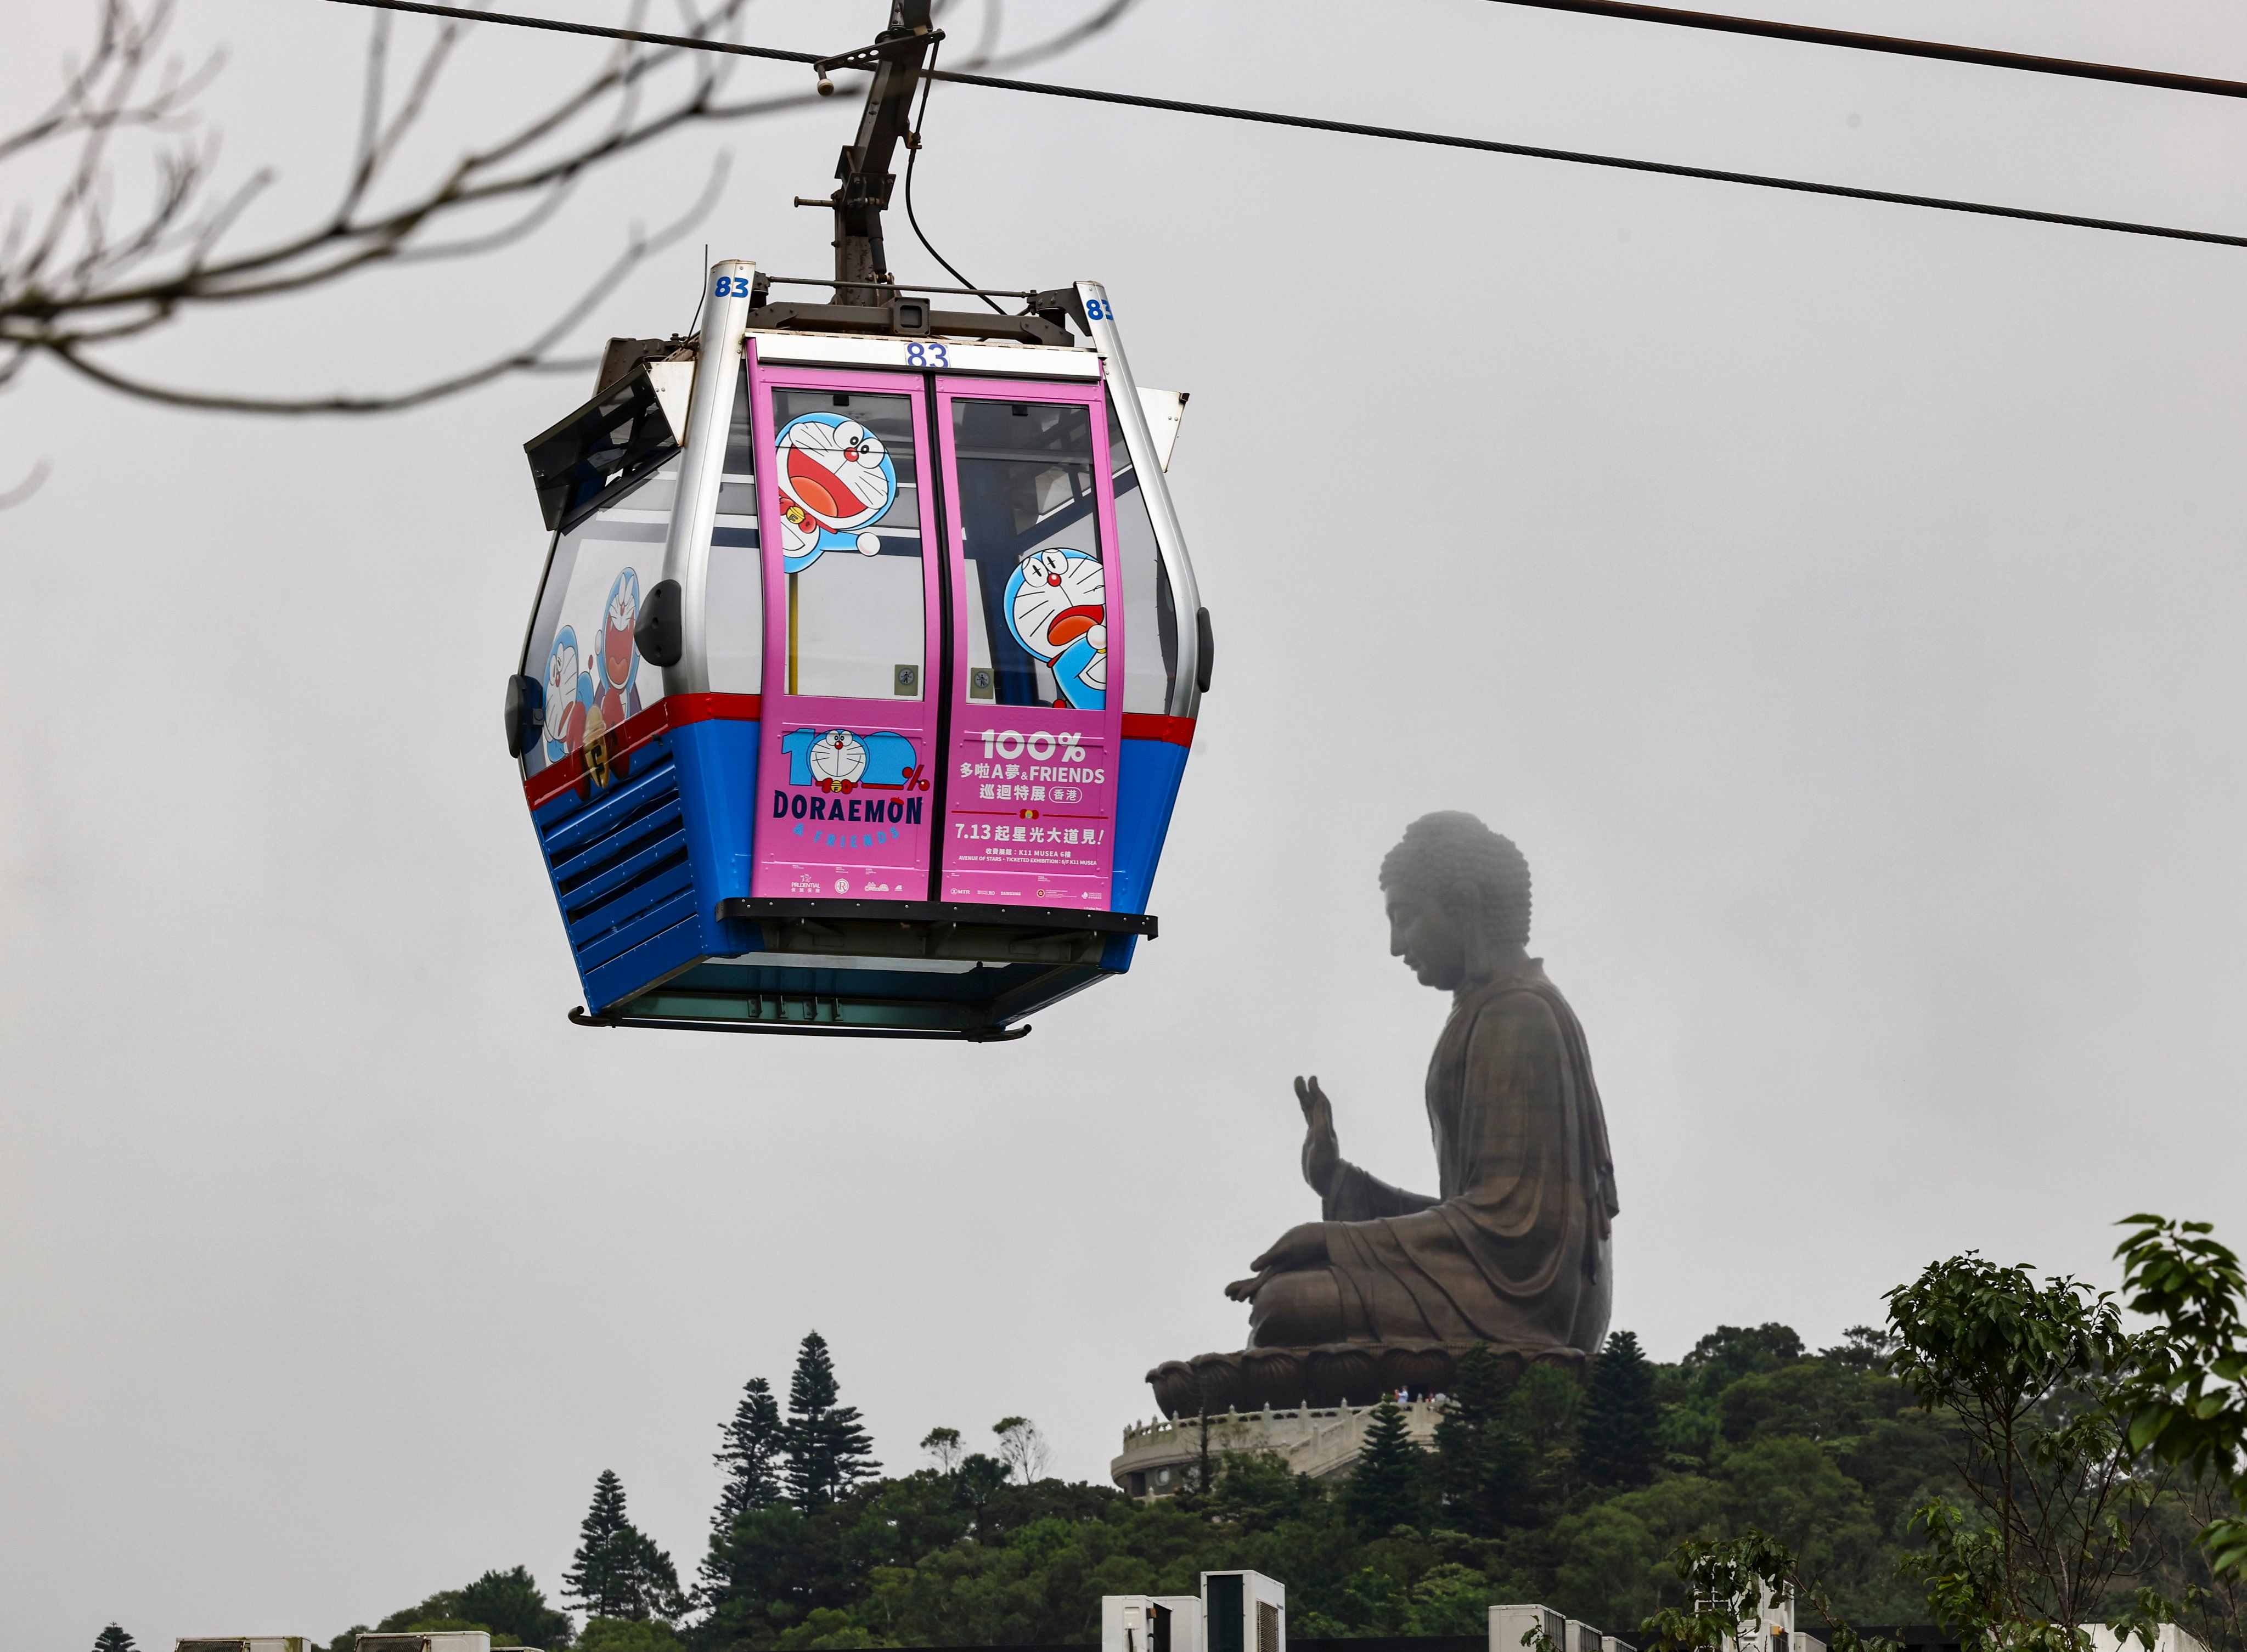 Ngong Ping 360’s 100% Doraemon & Friends cable car. Photo: Dickson Lee